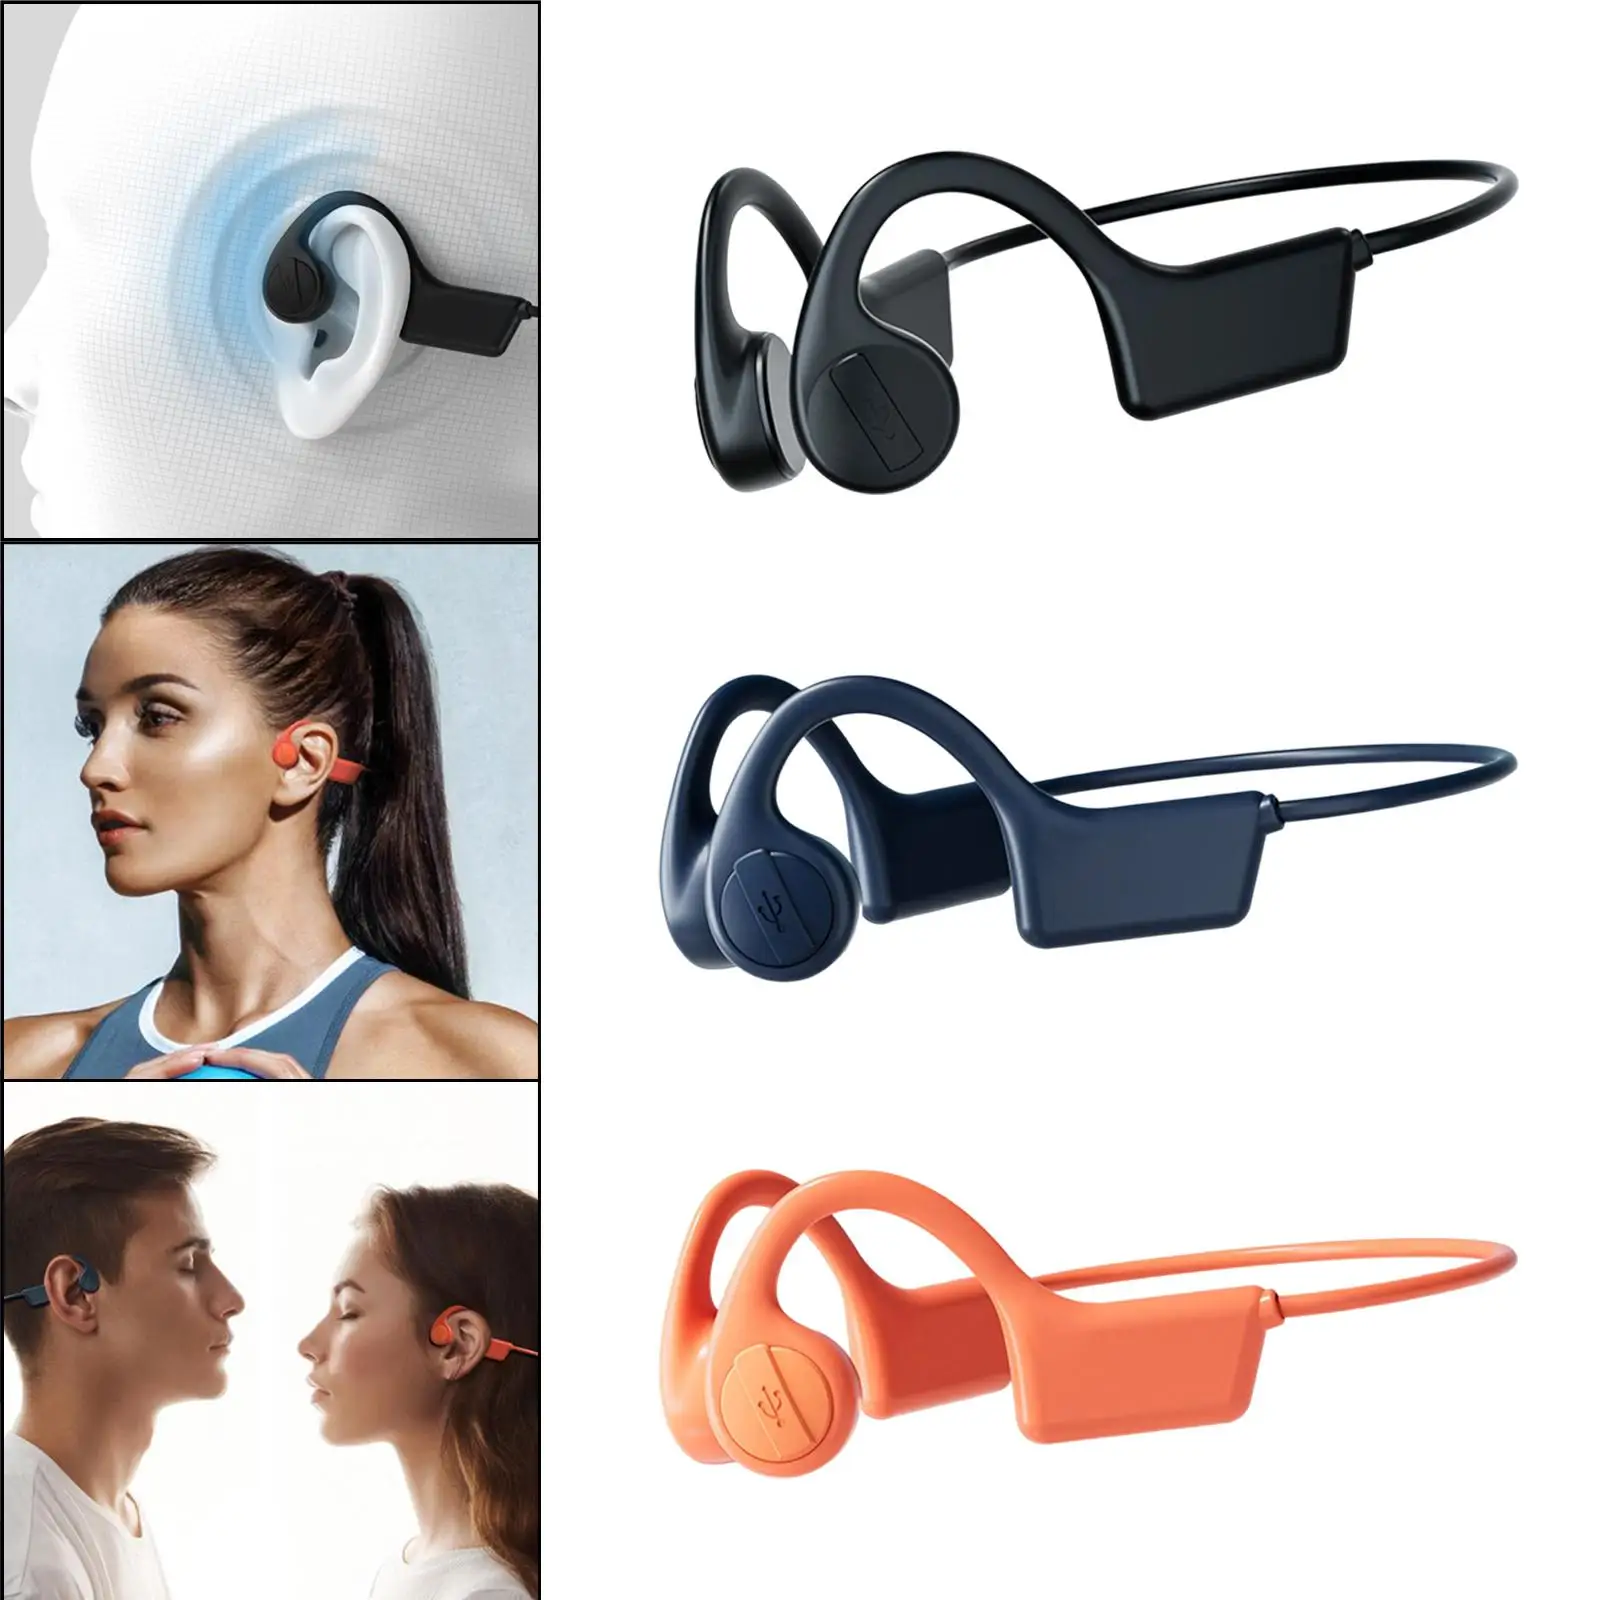 Bluetooth Headphone Bone Conduction Sweatproof with Mic 5.0 Painless wearing Open Ear Headset for Running Sports Workout Hiking